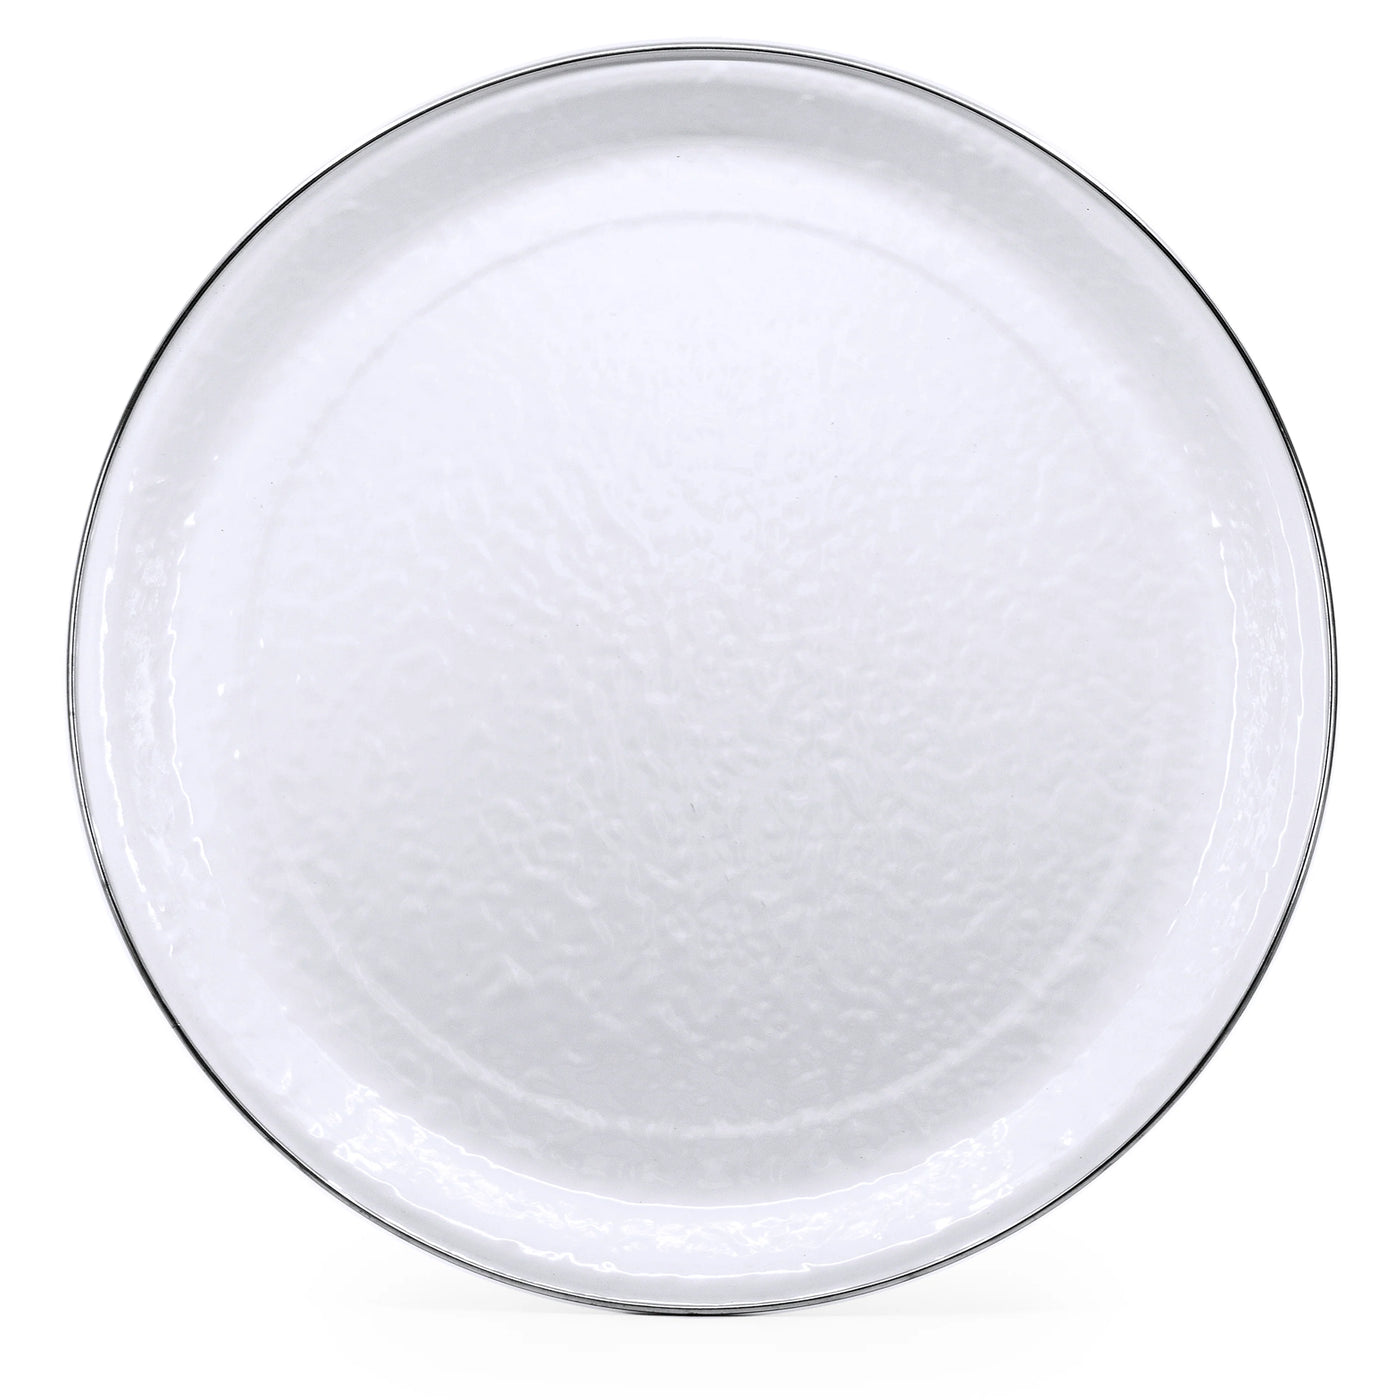 TRAY WHITE (Available in 2 Sizes)